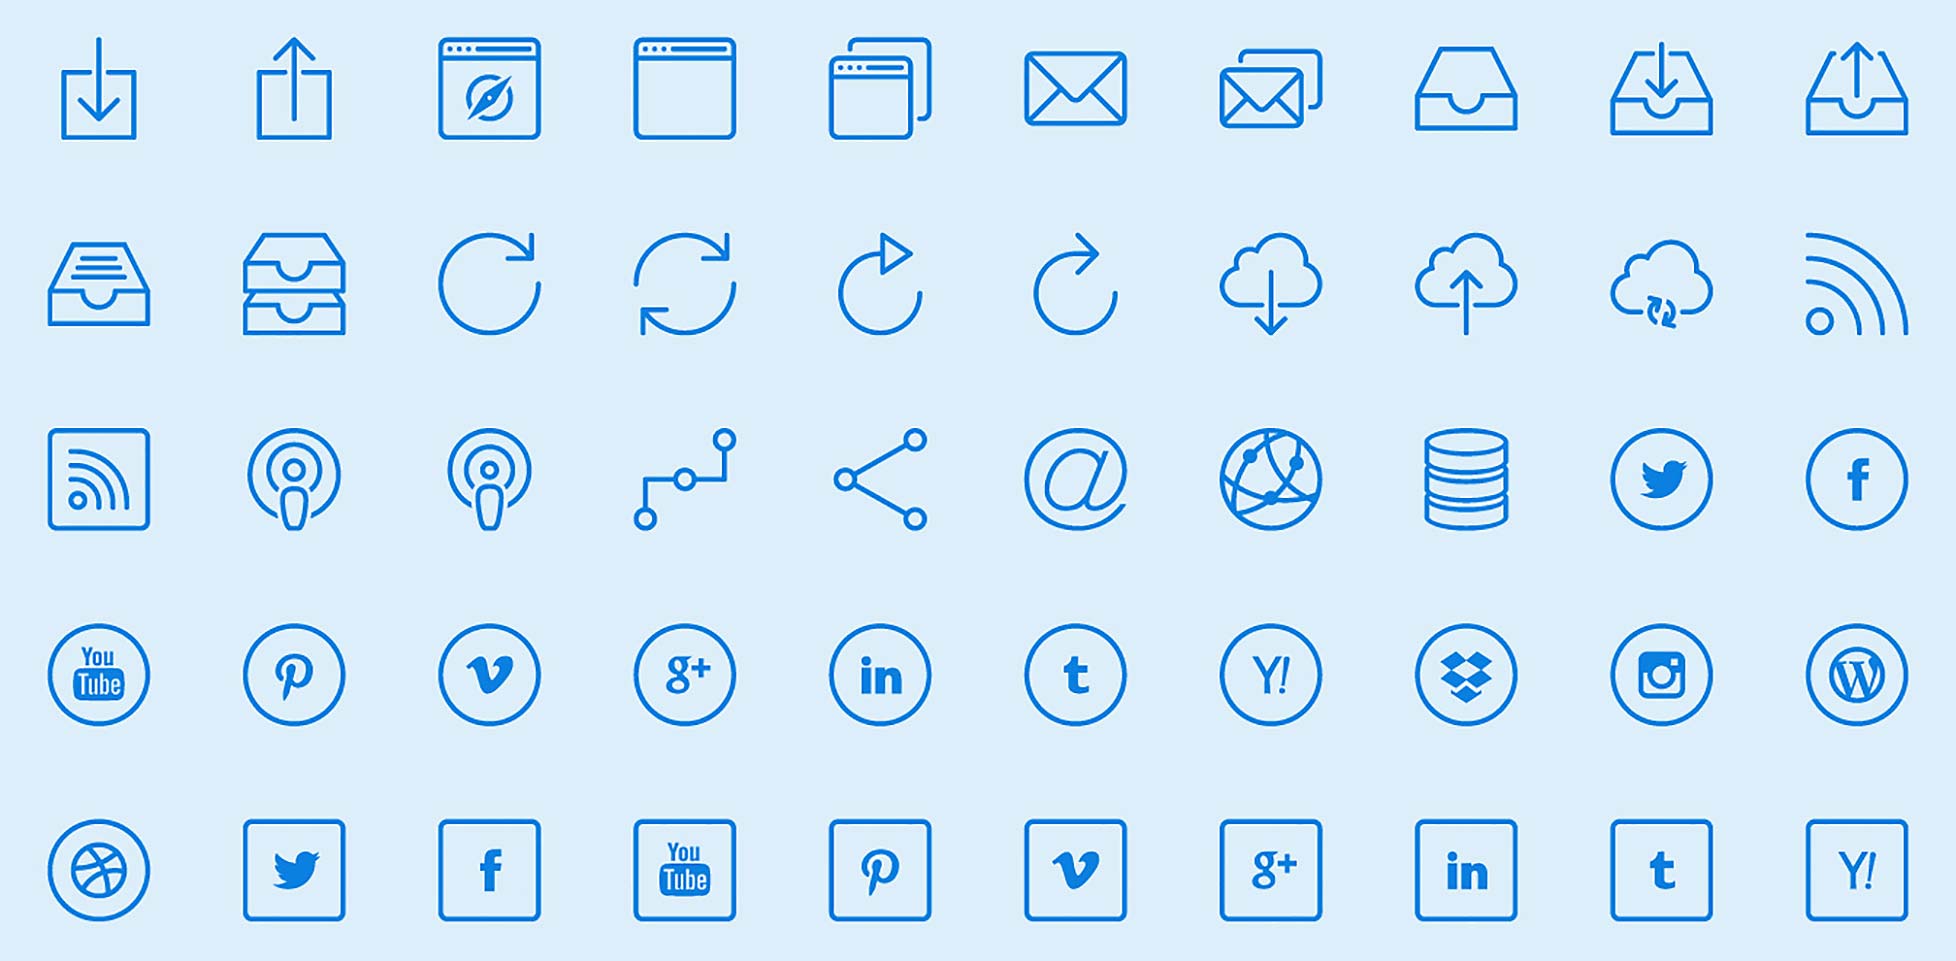 Free download: 450 outline icons